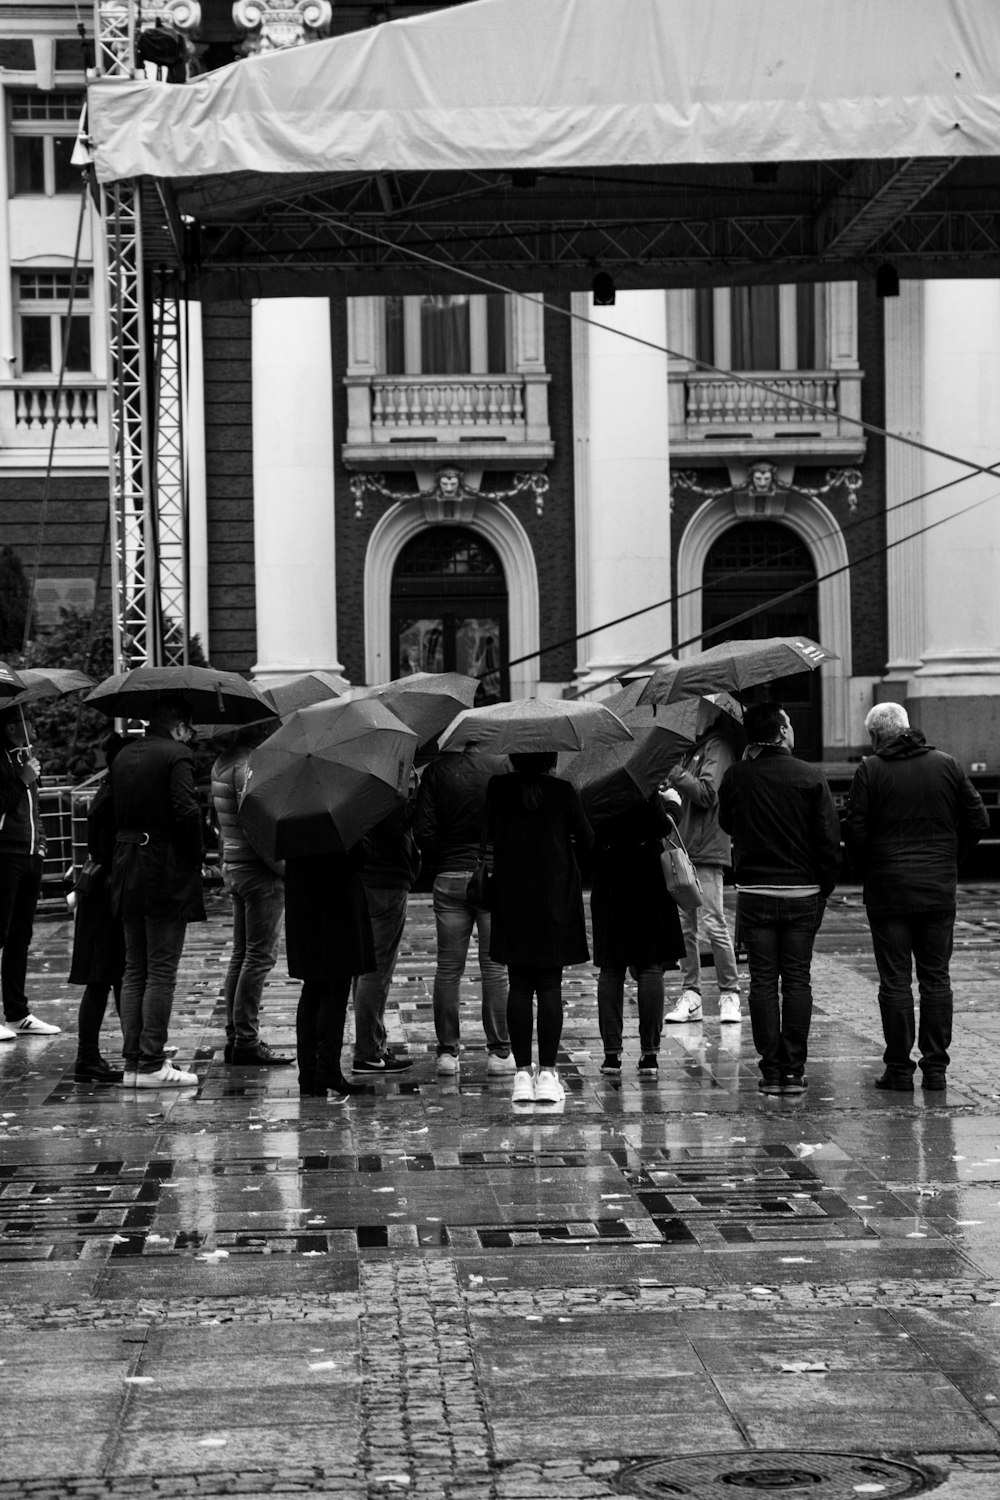 a group of people with umbrellas standing in the rain